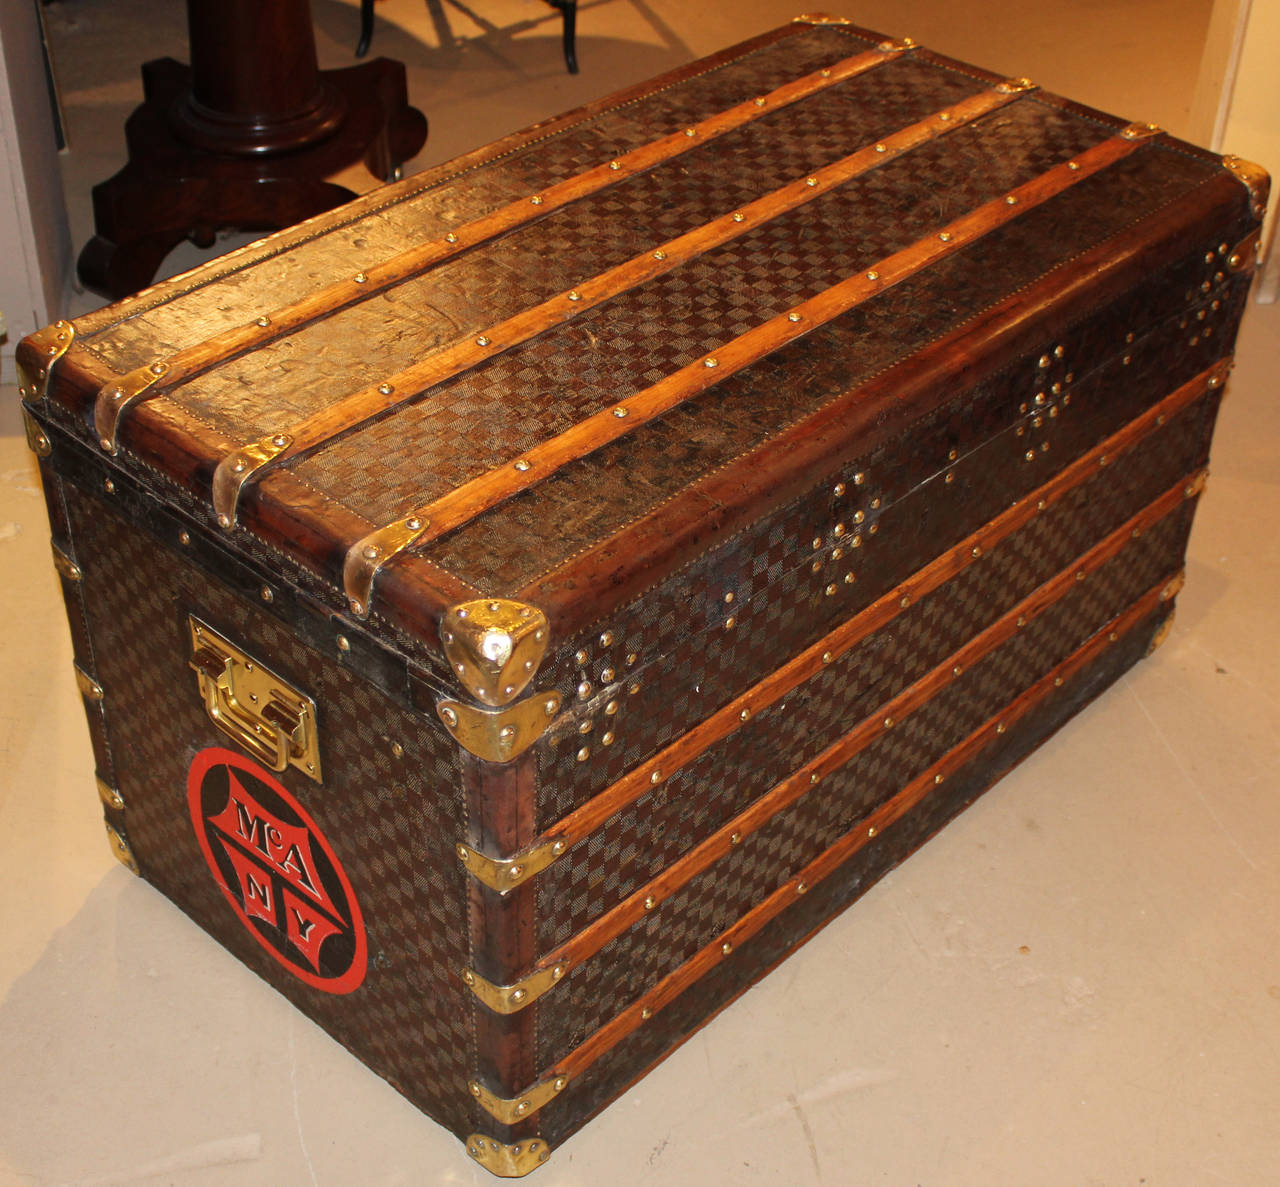 A fabulous Louis Vuitton steamer trunk with early checkerboard canvas exterior, S/N 44780, circa 1890, with birch slats, brass findings, linen interiors with original trays, zinc bottom (found only on the best quality trunks),padded interior cover